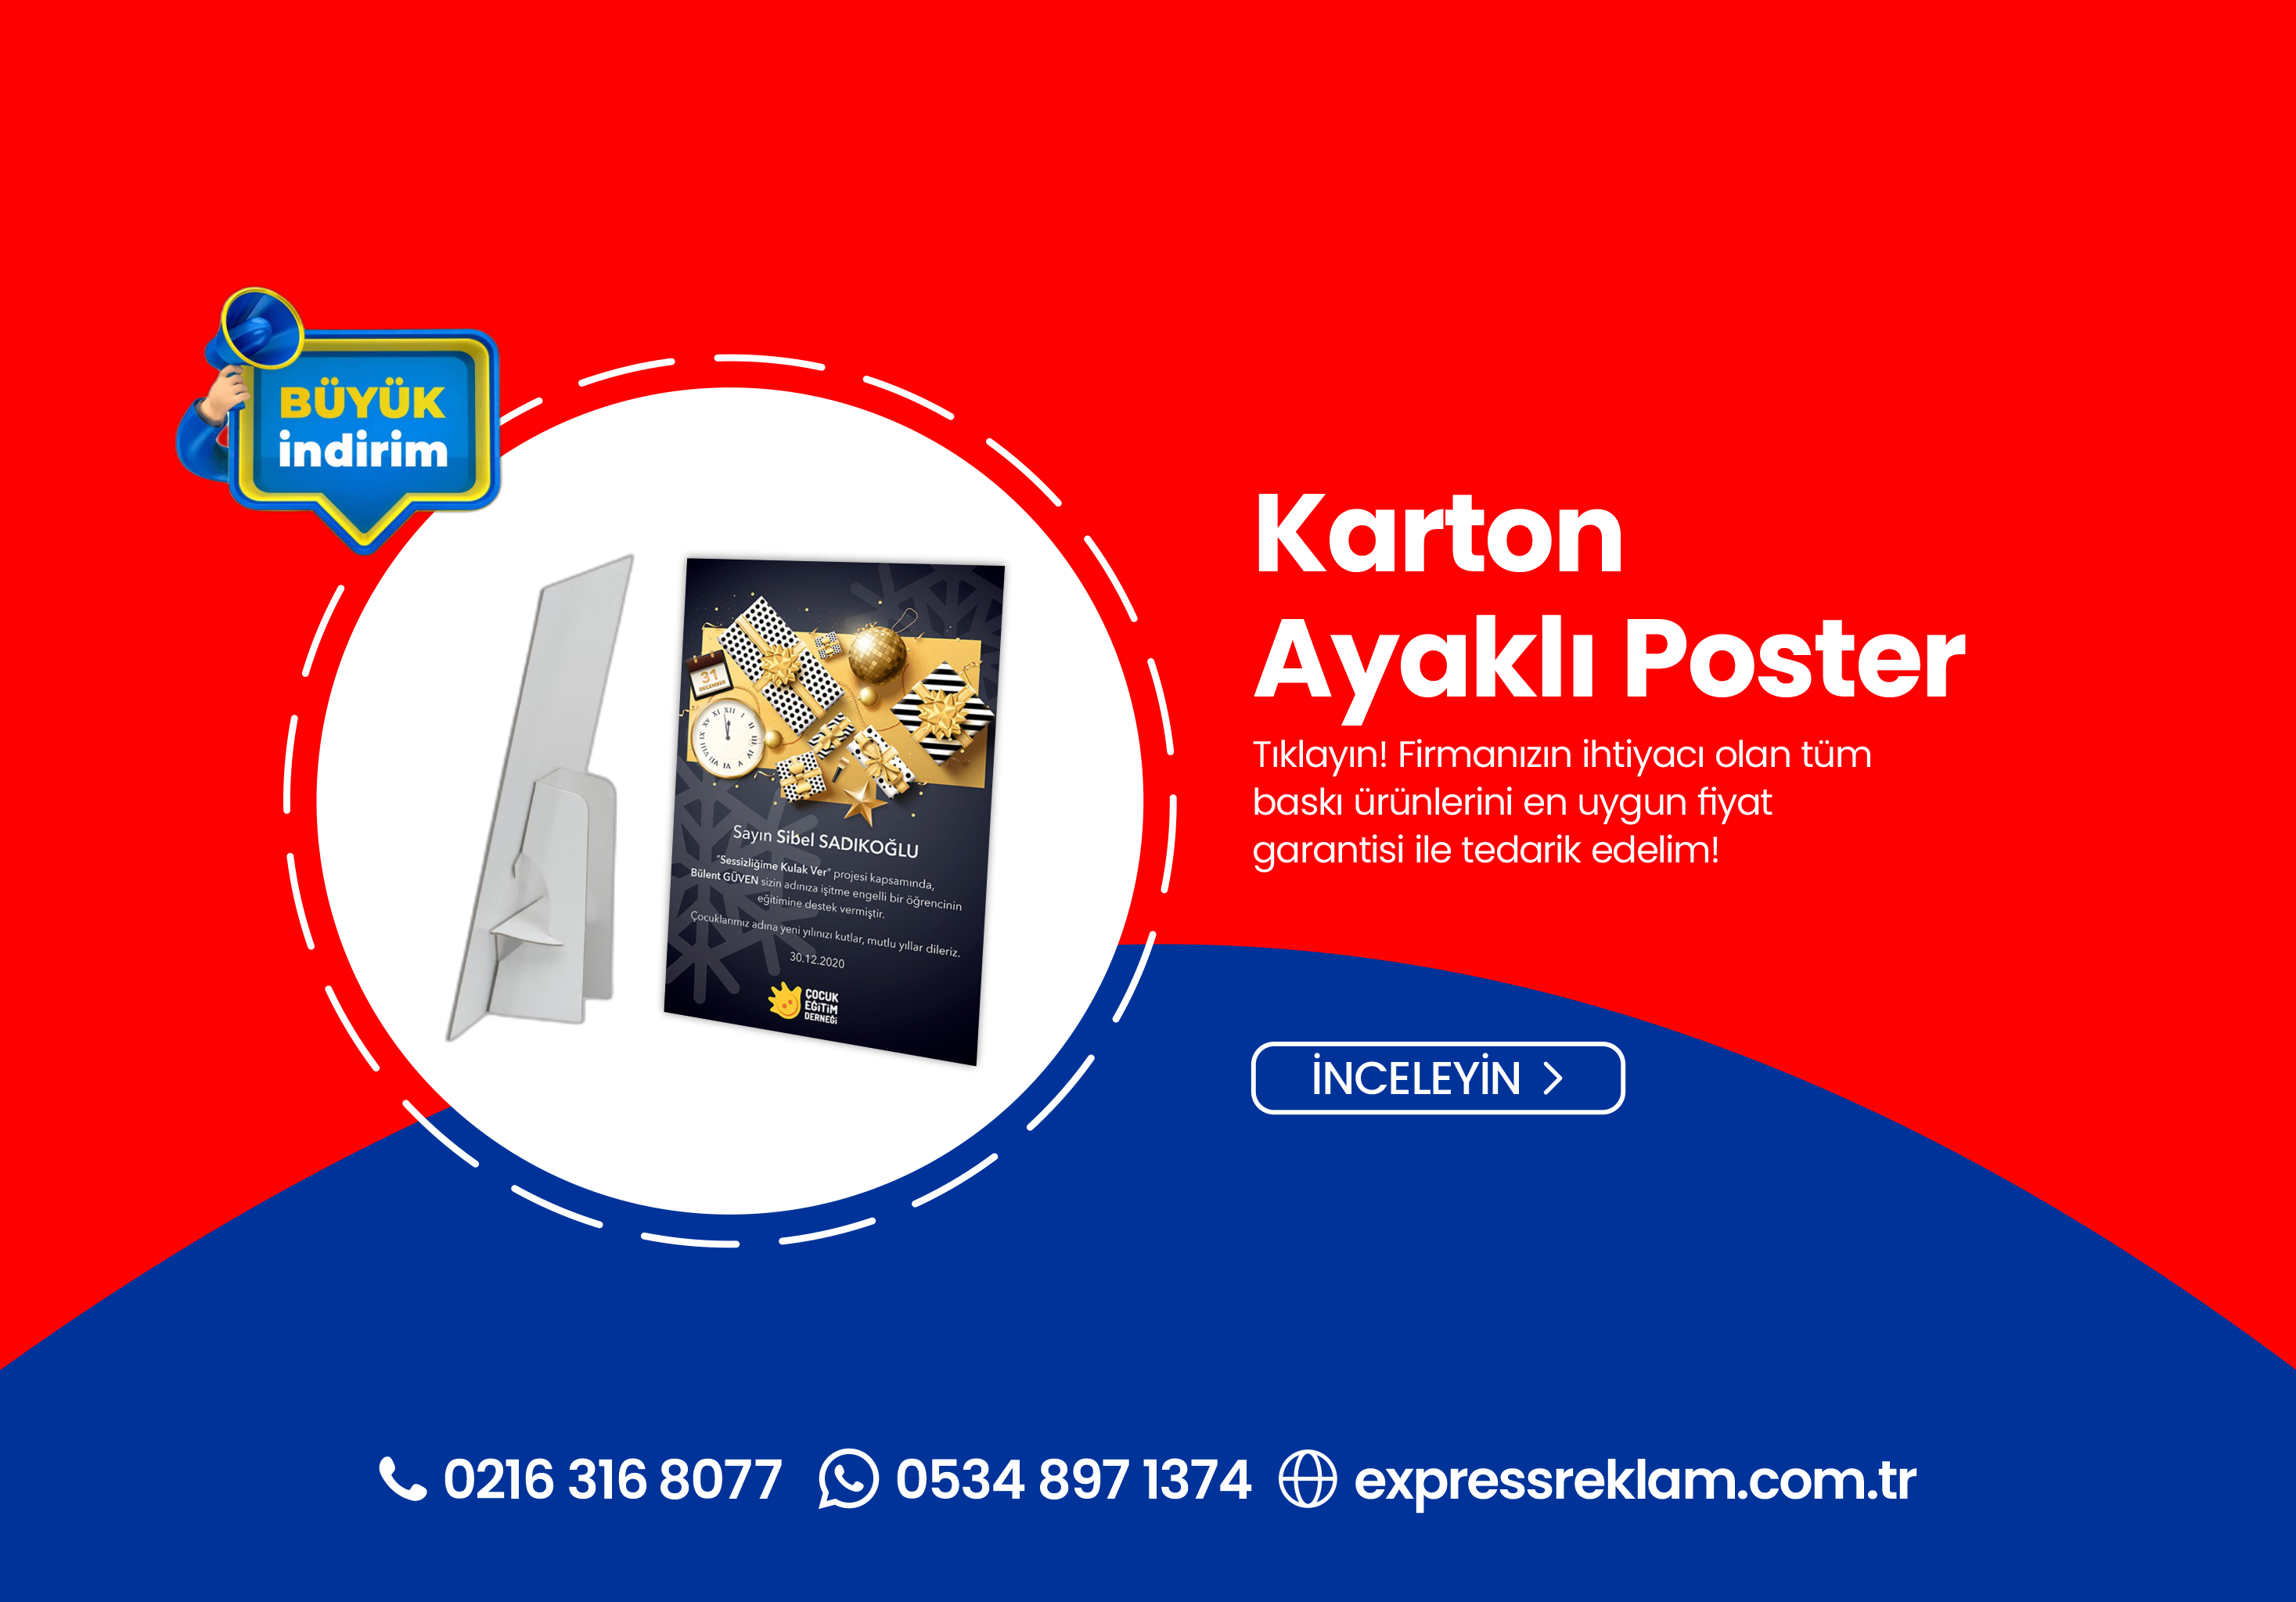 You are currently viewing Karton Ayaklı Poster